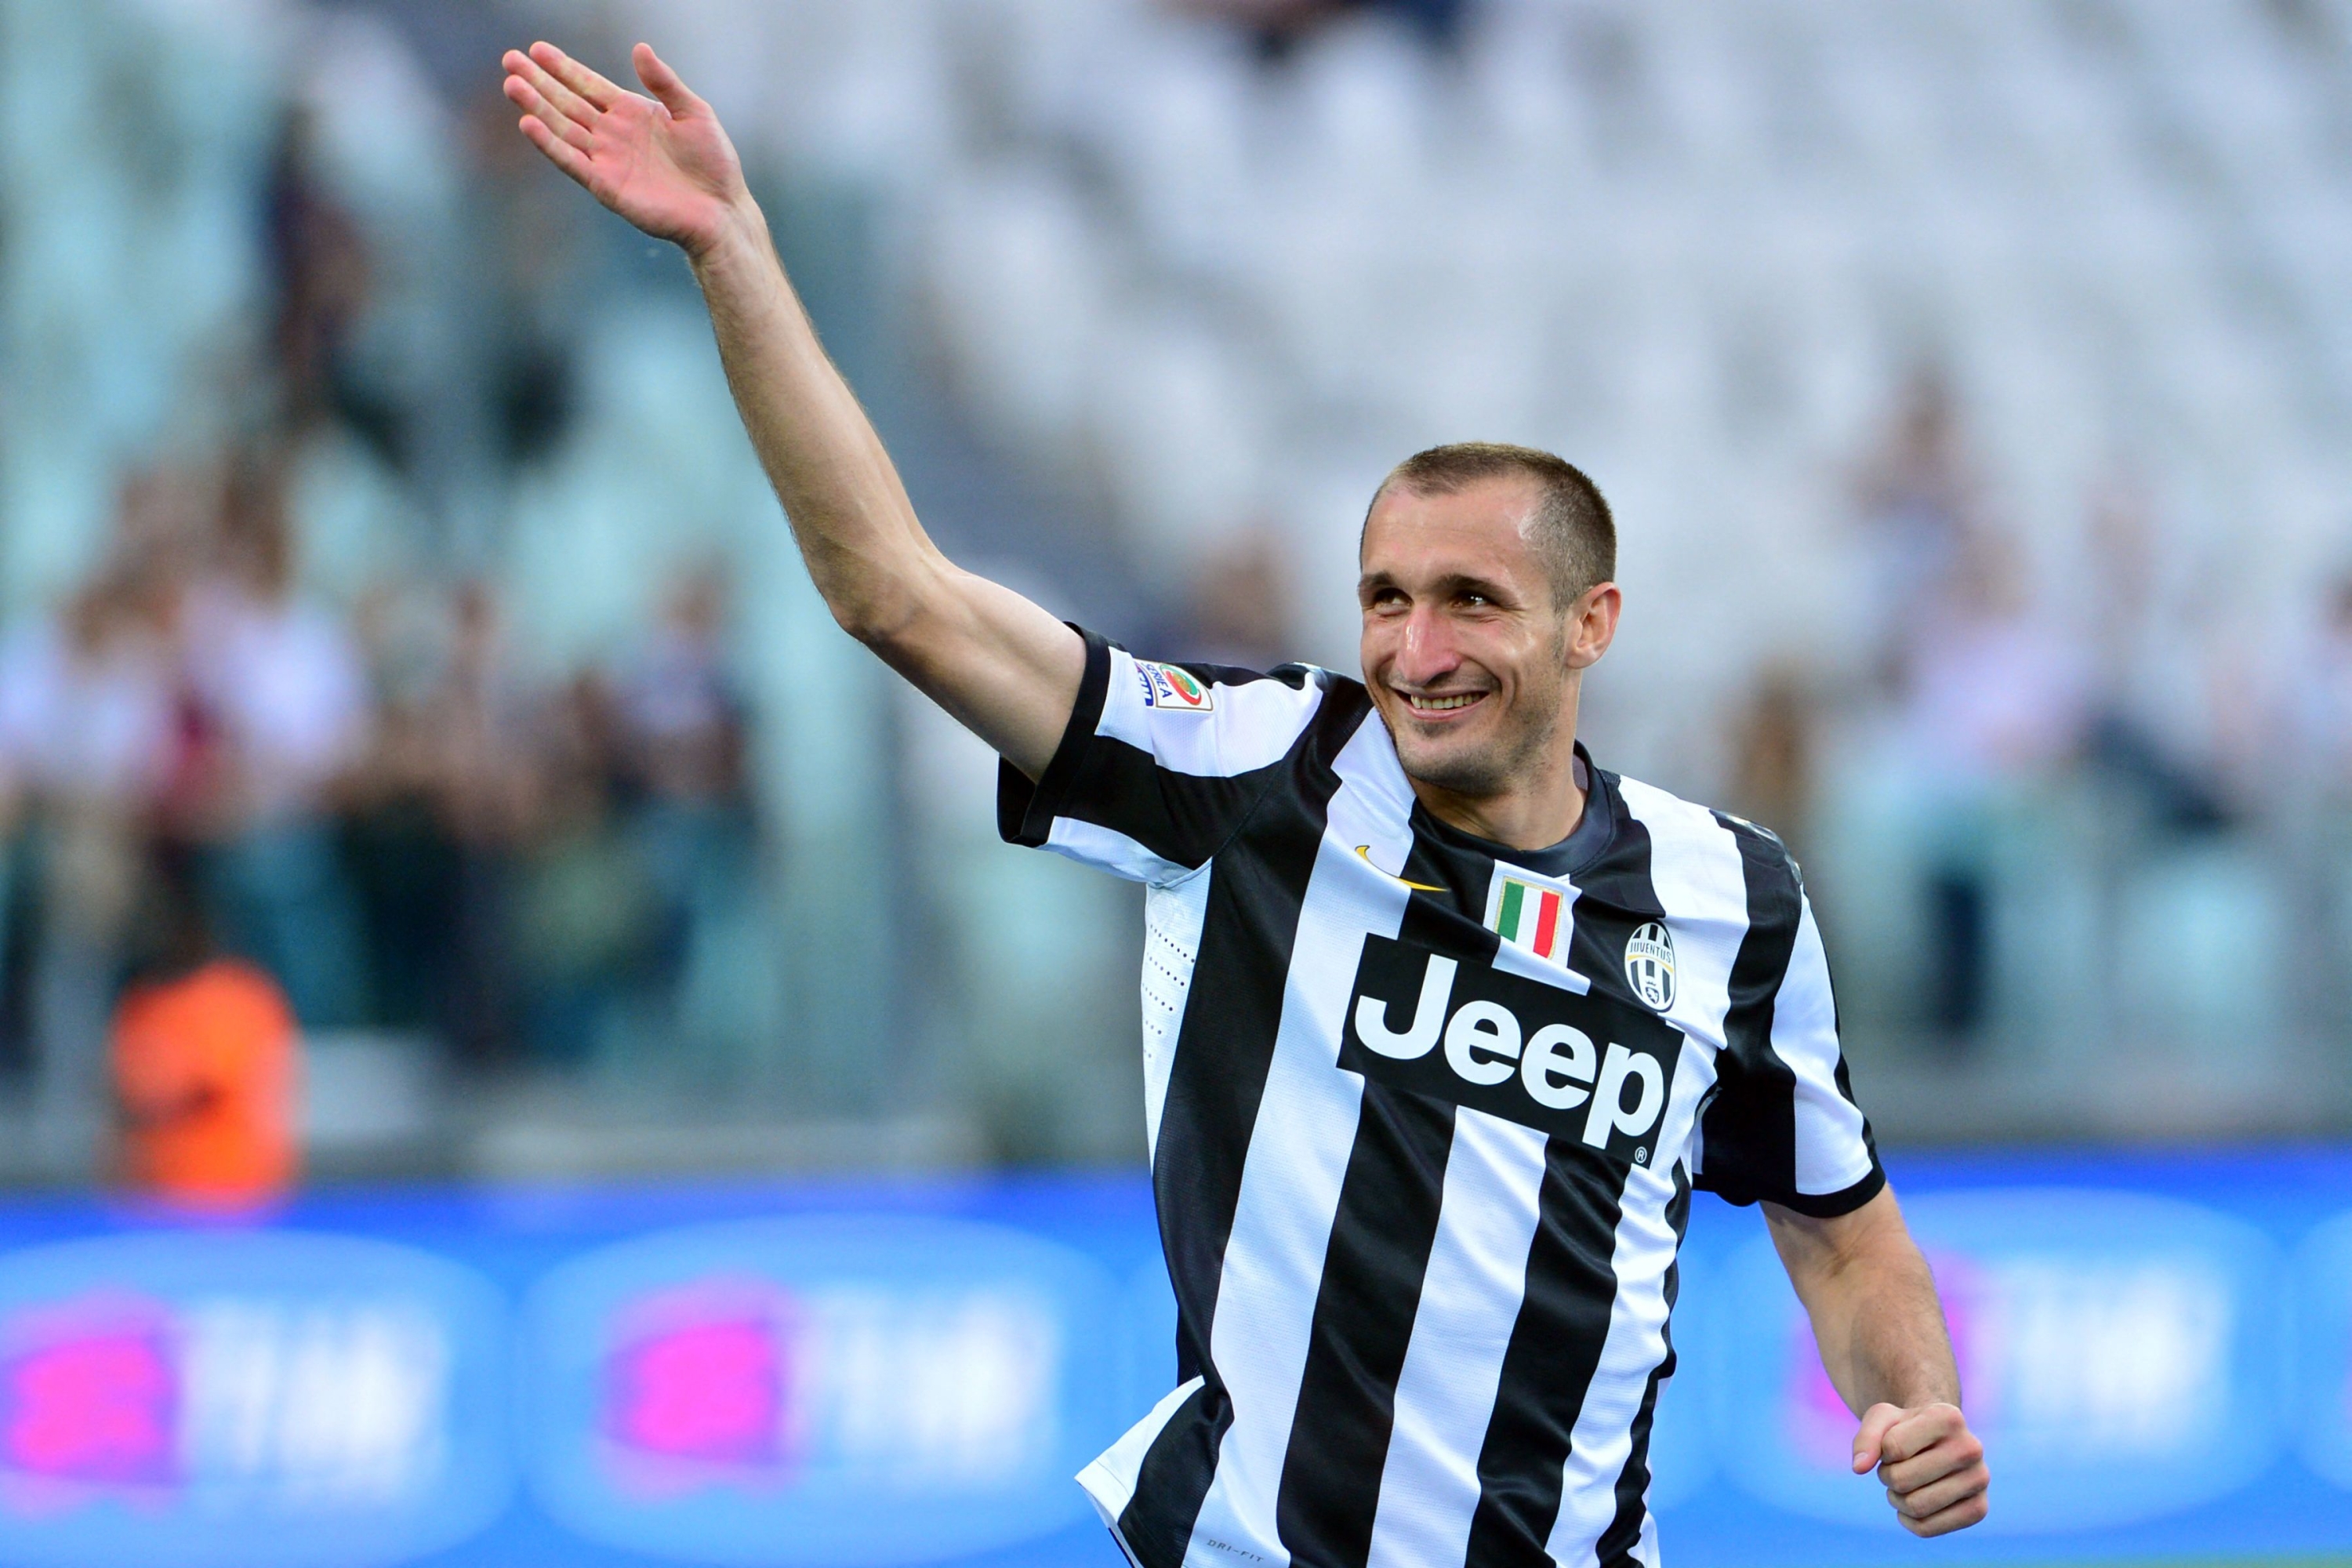 (FILES) Juventus' defender Giorgio Chiellini arrives for the ceremony of the Scudetto, the Italian Serie A trophy on the pitch after the Italian Serie A football match between Juventus and Cagliari at the "Juventus Stadium" in Turin on May 11, 2013. Former Italy and Juventus defender Chiellini revealed he would be hanging up his boots at the age of 39 in a short post on social media accompanied by a video showing the highlights of his 23 years in the professional game, on December 12, 2023. (Photo by Giuseppe CACACE / AFP)